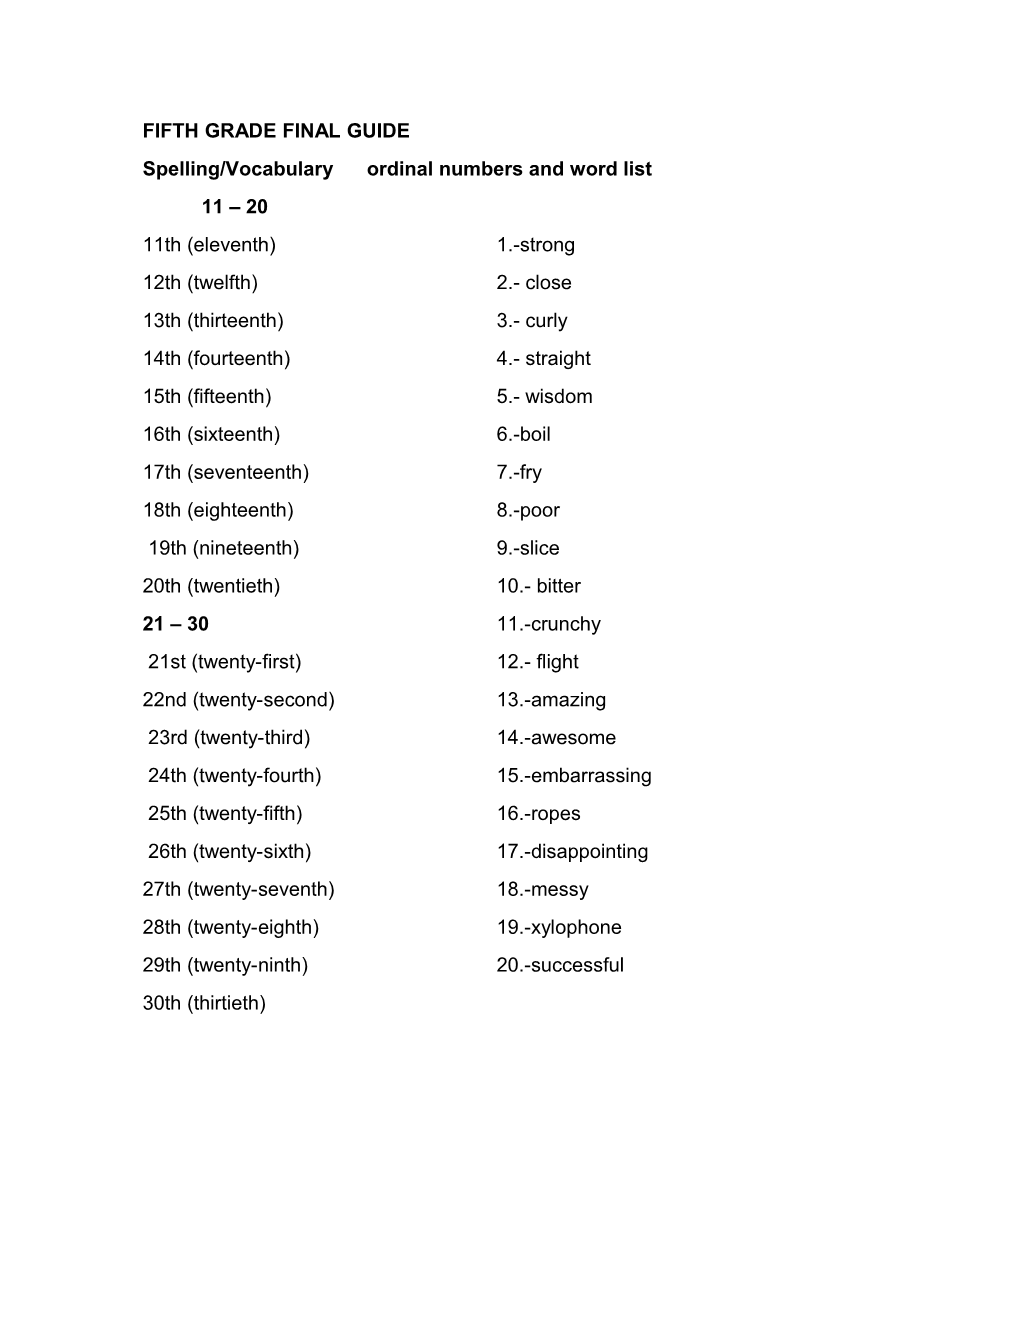 Spelling/Vocabulary Ordinal Numbers and Word List